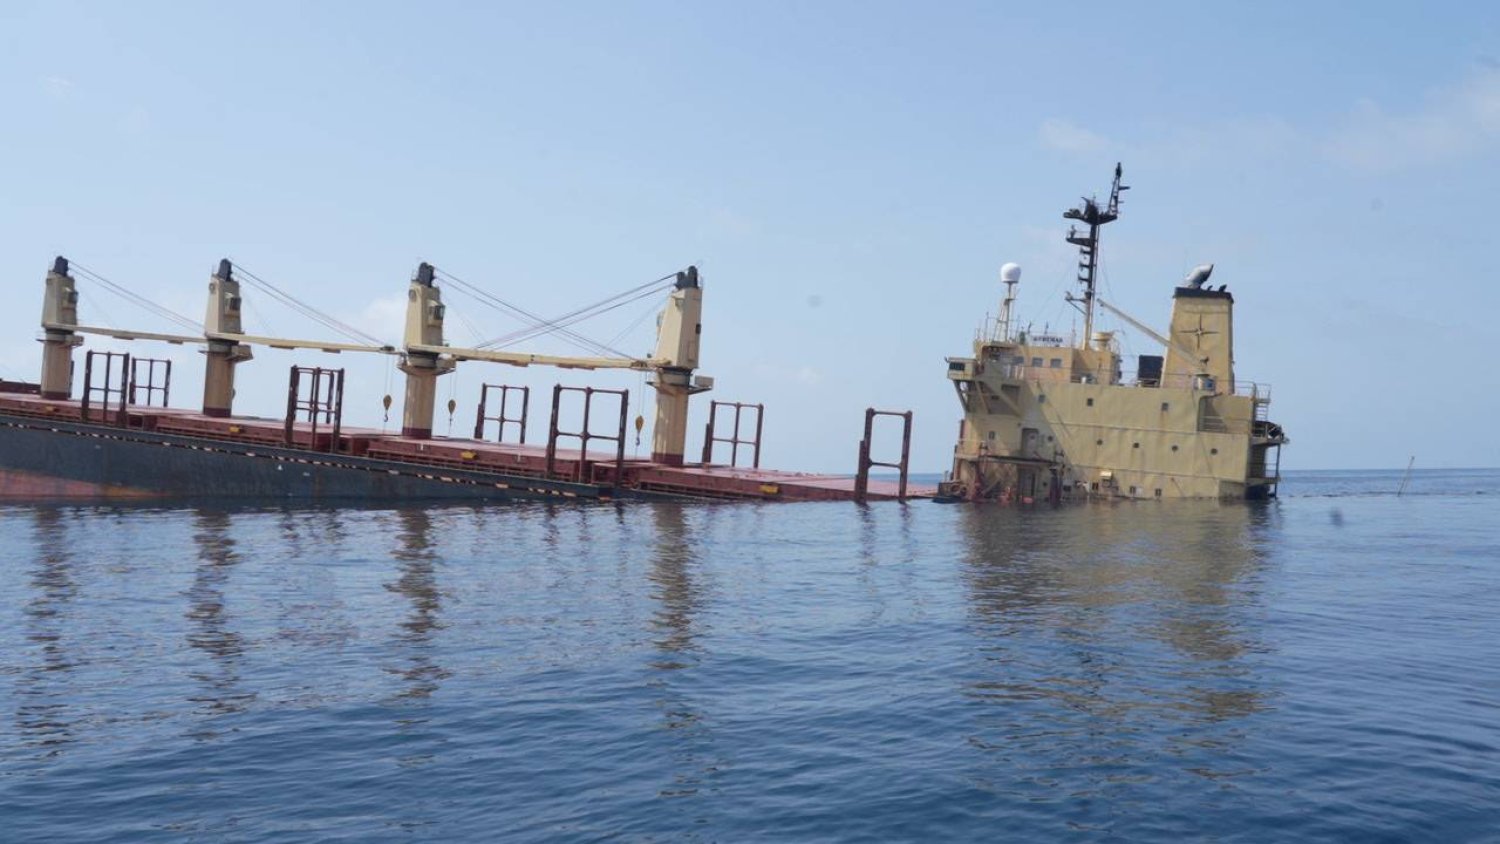 CENTCOM: MV Rubymar sinks in the Red Sea following Houthis attack